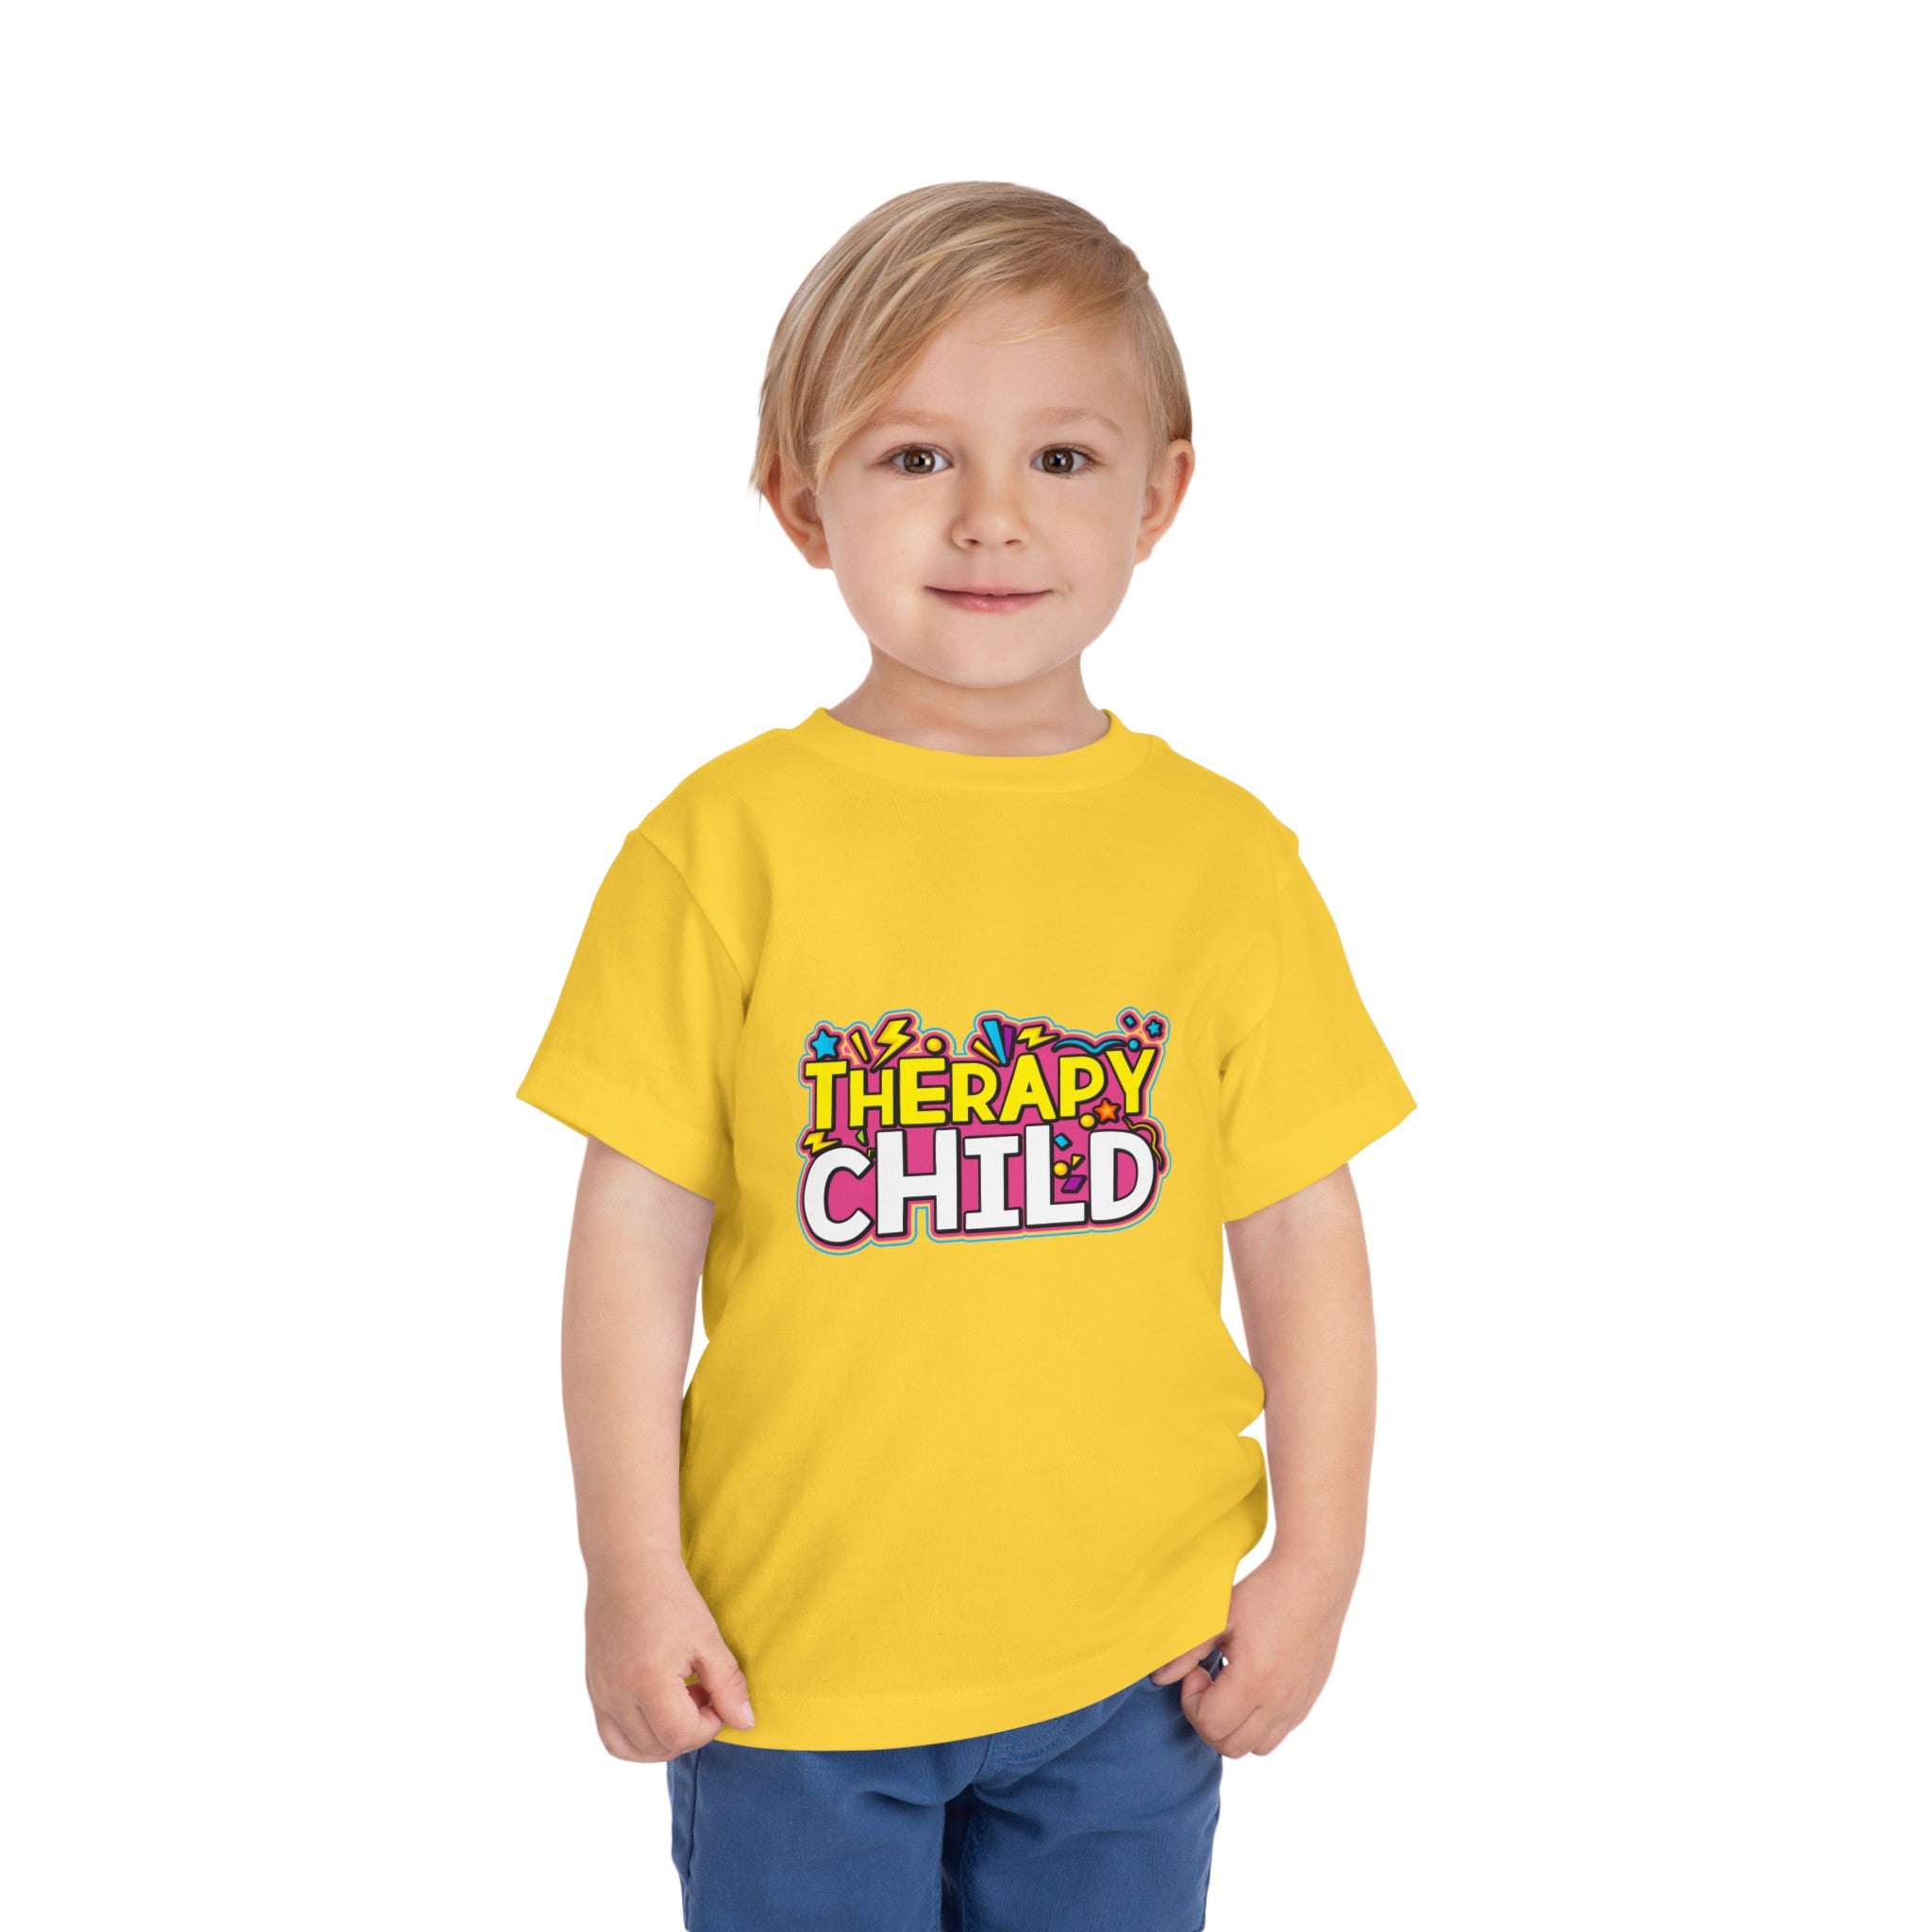 Therapy Child - Pink [Toddler Tee]